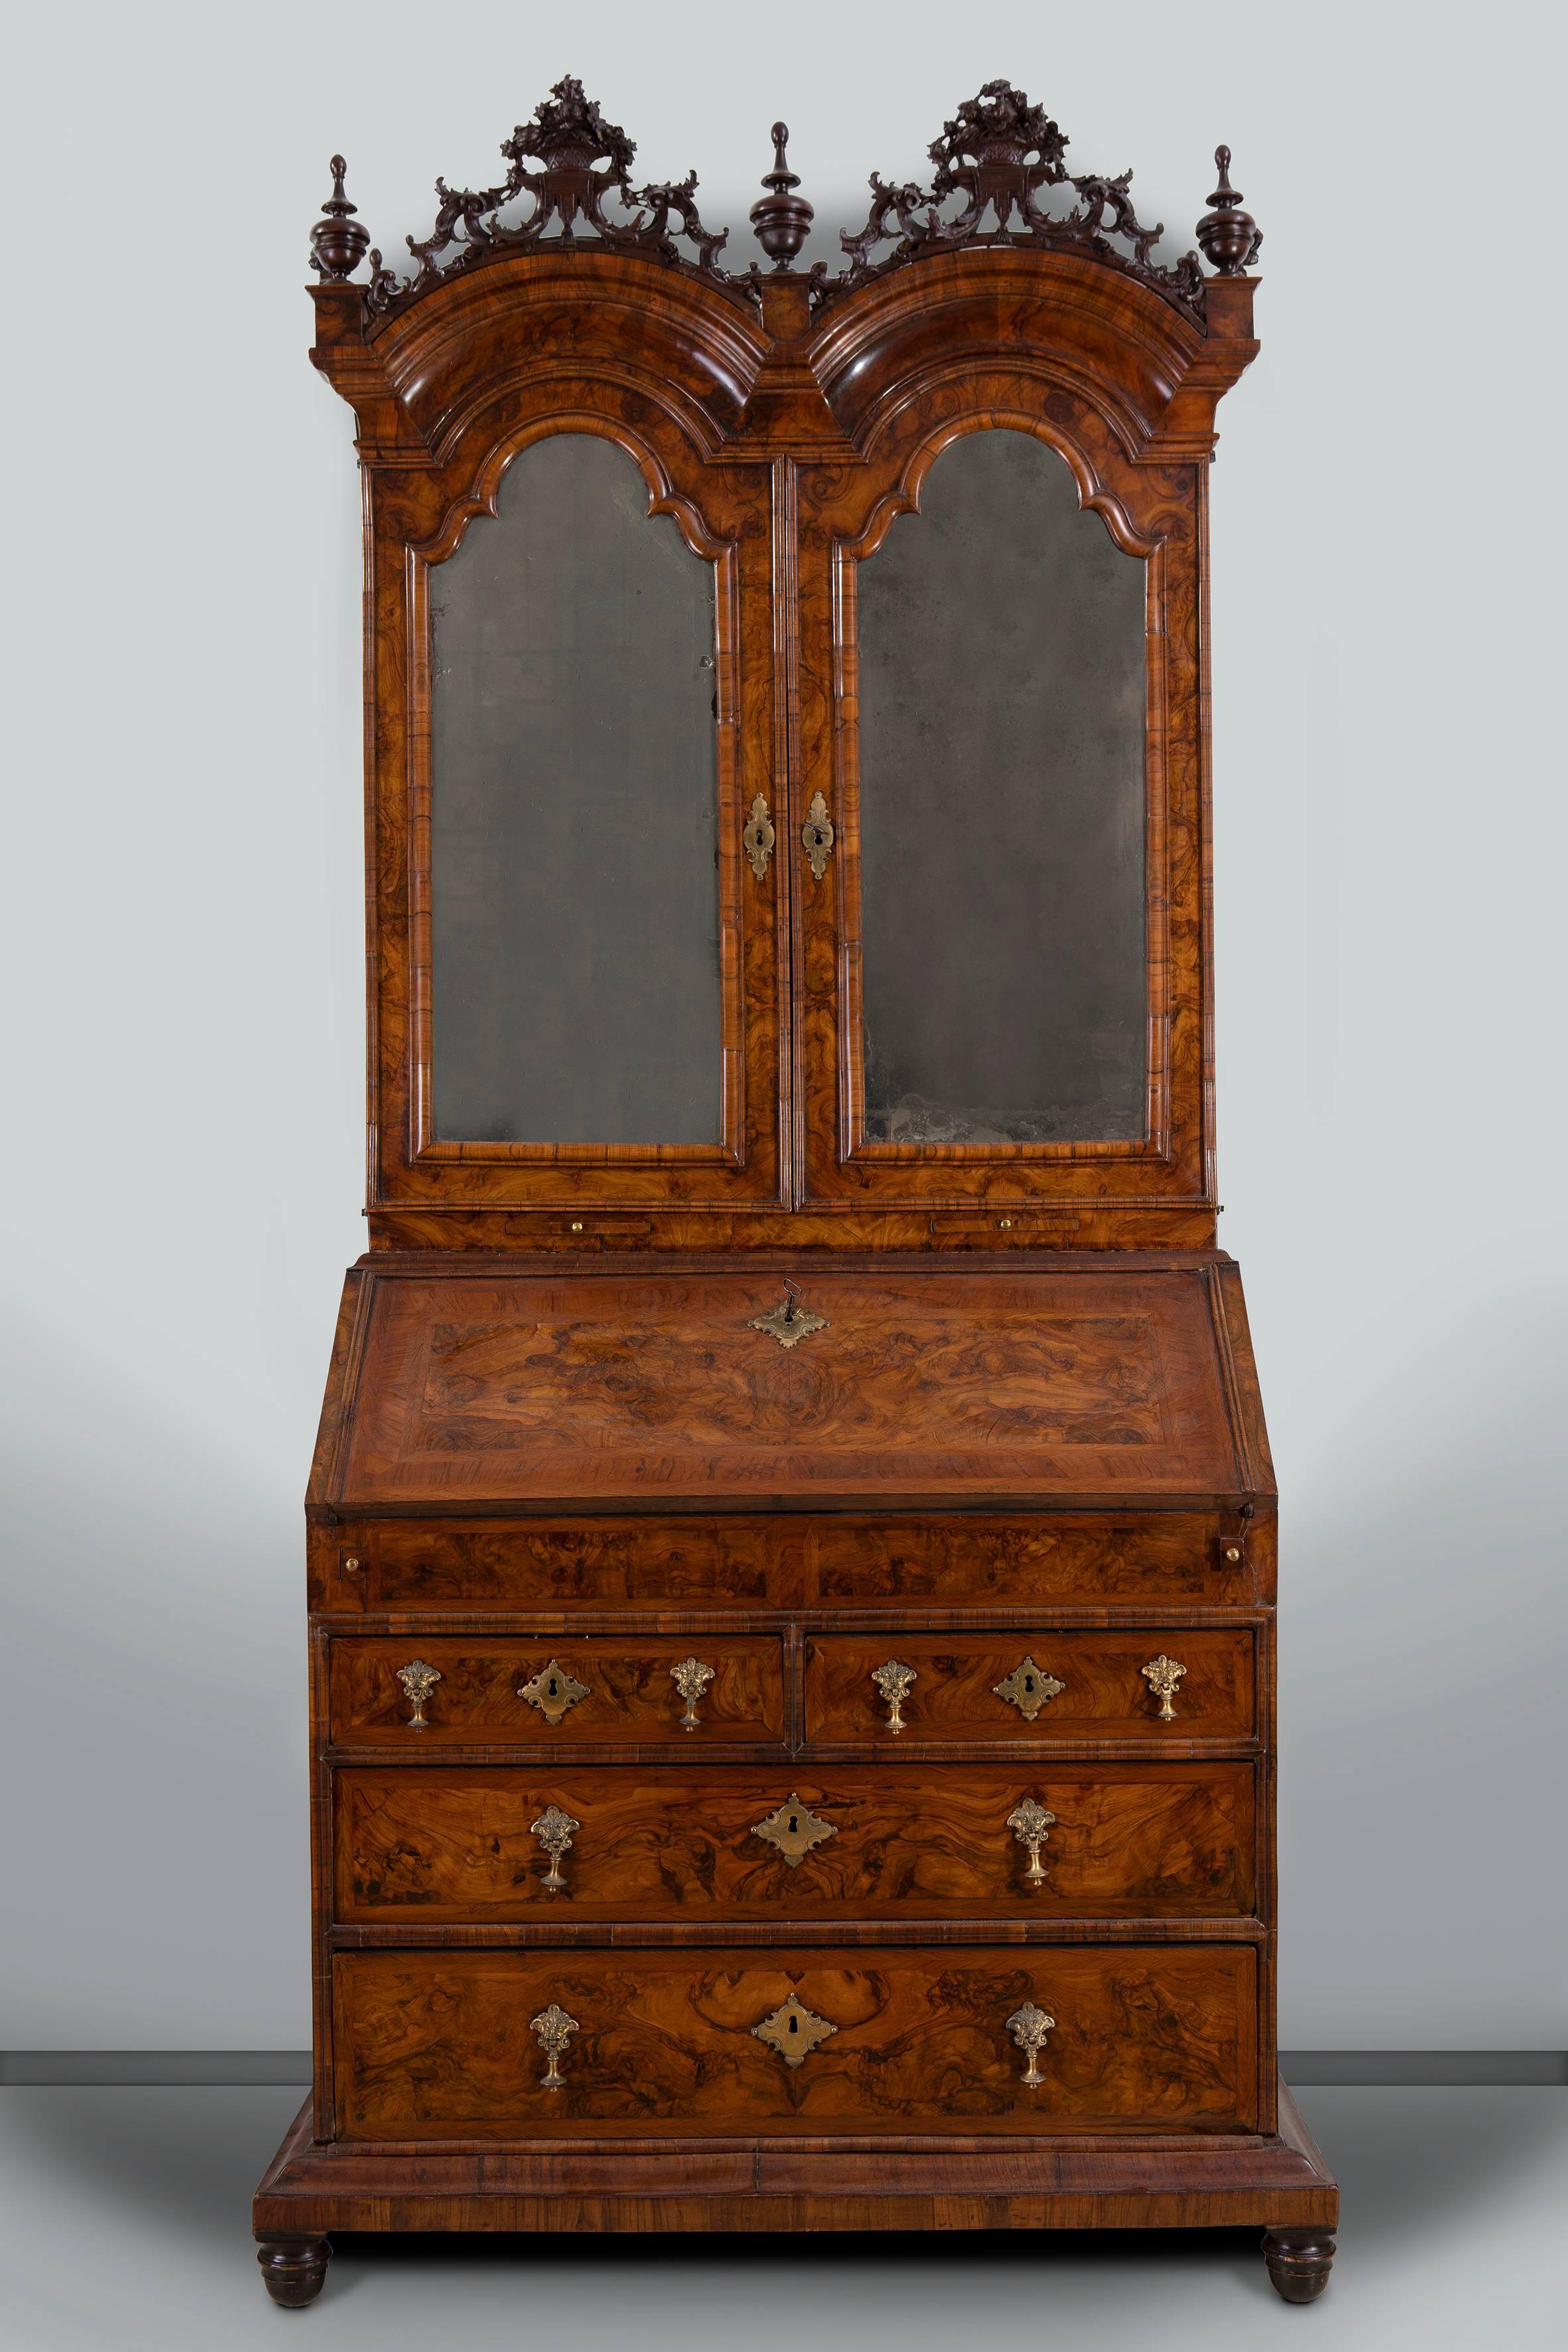 North Italian walnut bureau cabinet inspired to English bureau cabinets, Veneto, second quarter of the 18th century

Feather-banded overall, the double-domed cornice floral cresting divided by orb finials, above a pair of arched doors with